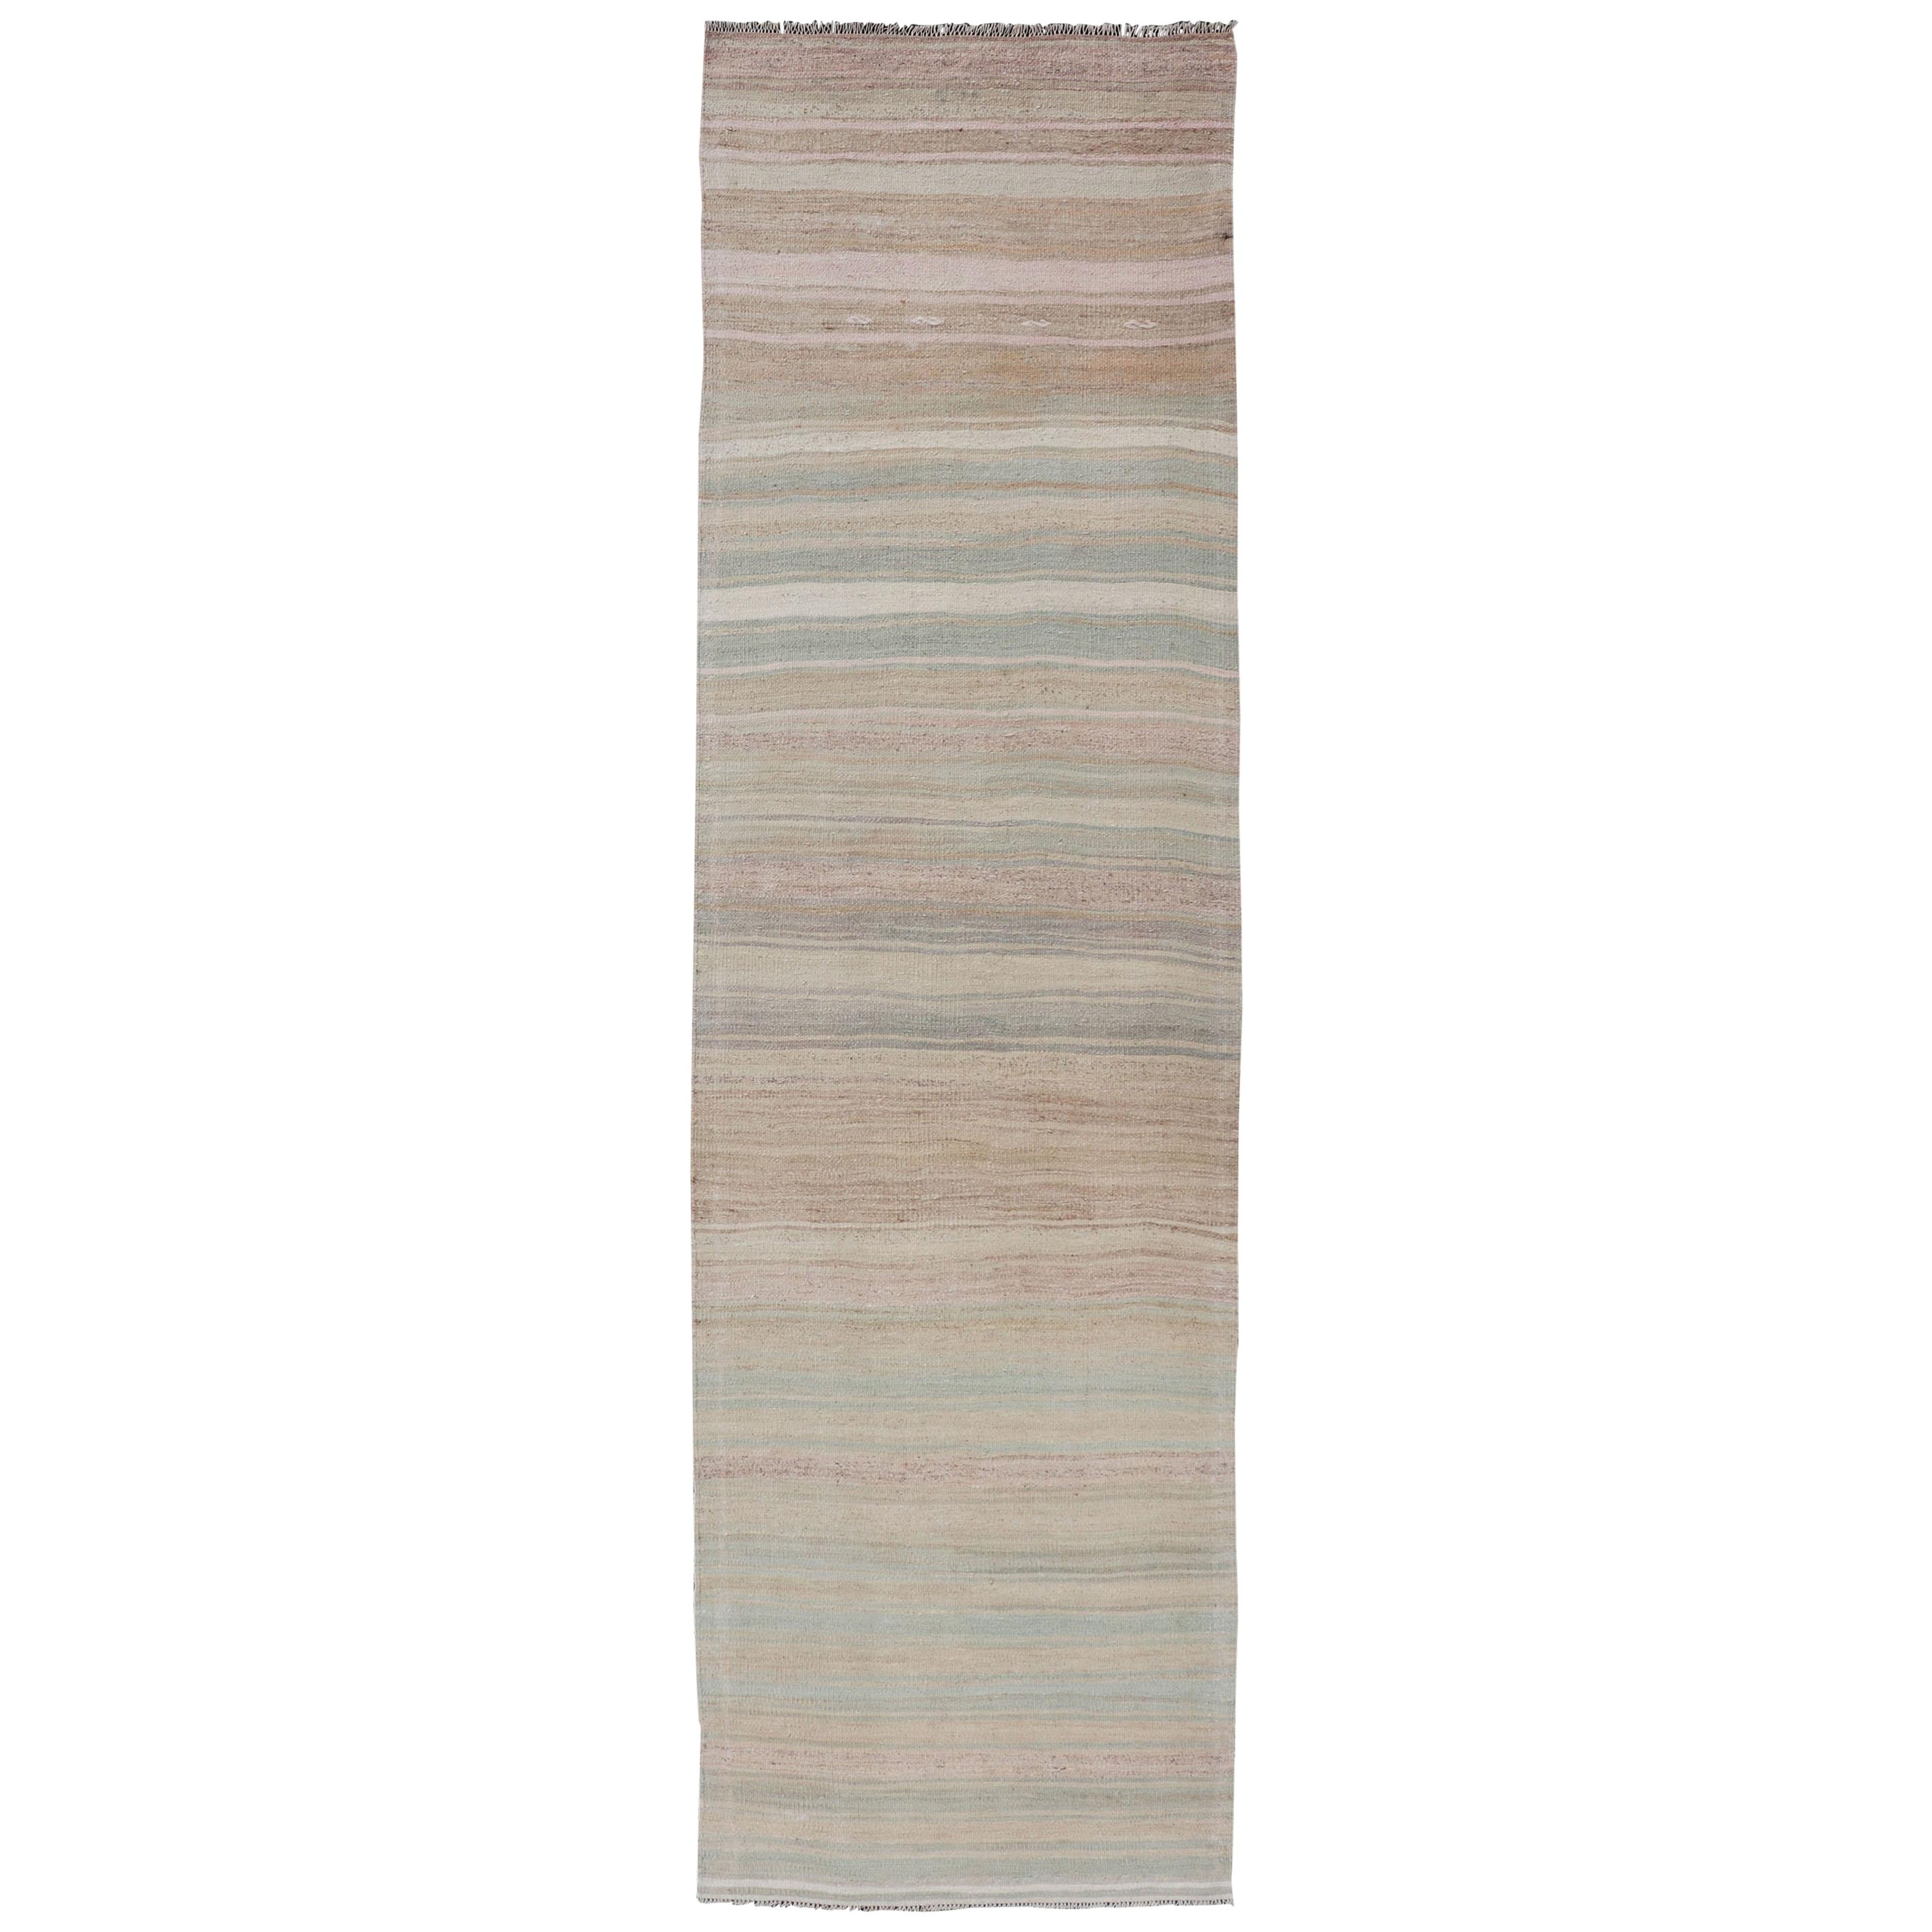 Striped Vintage Turkish Flat-Weave Runner in Light Green, Pink, Tan, and Taupe